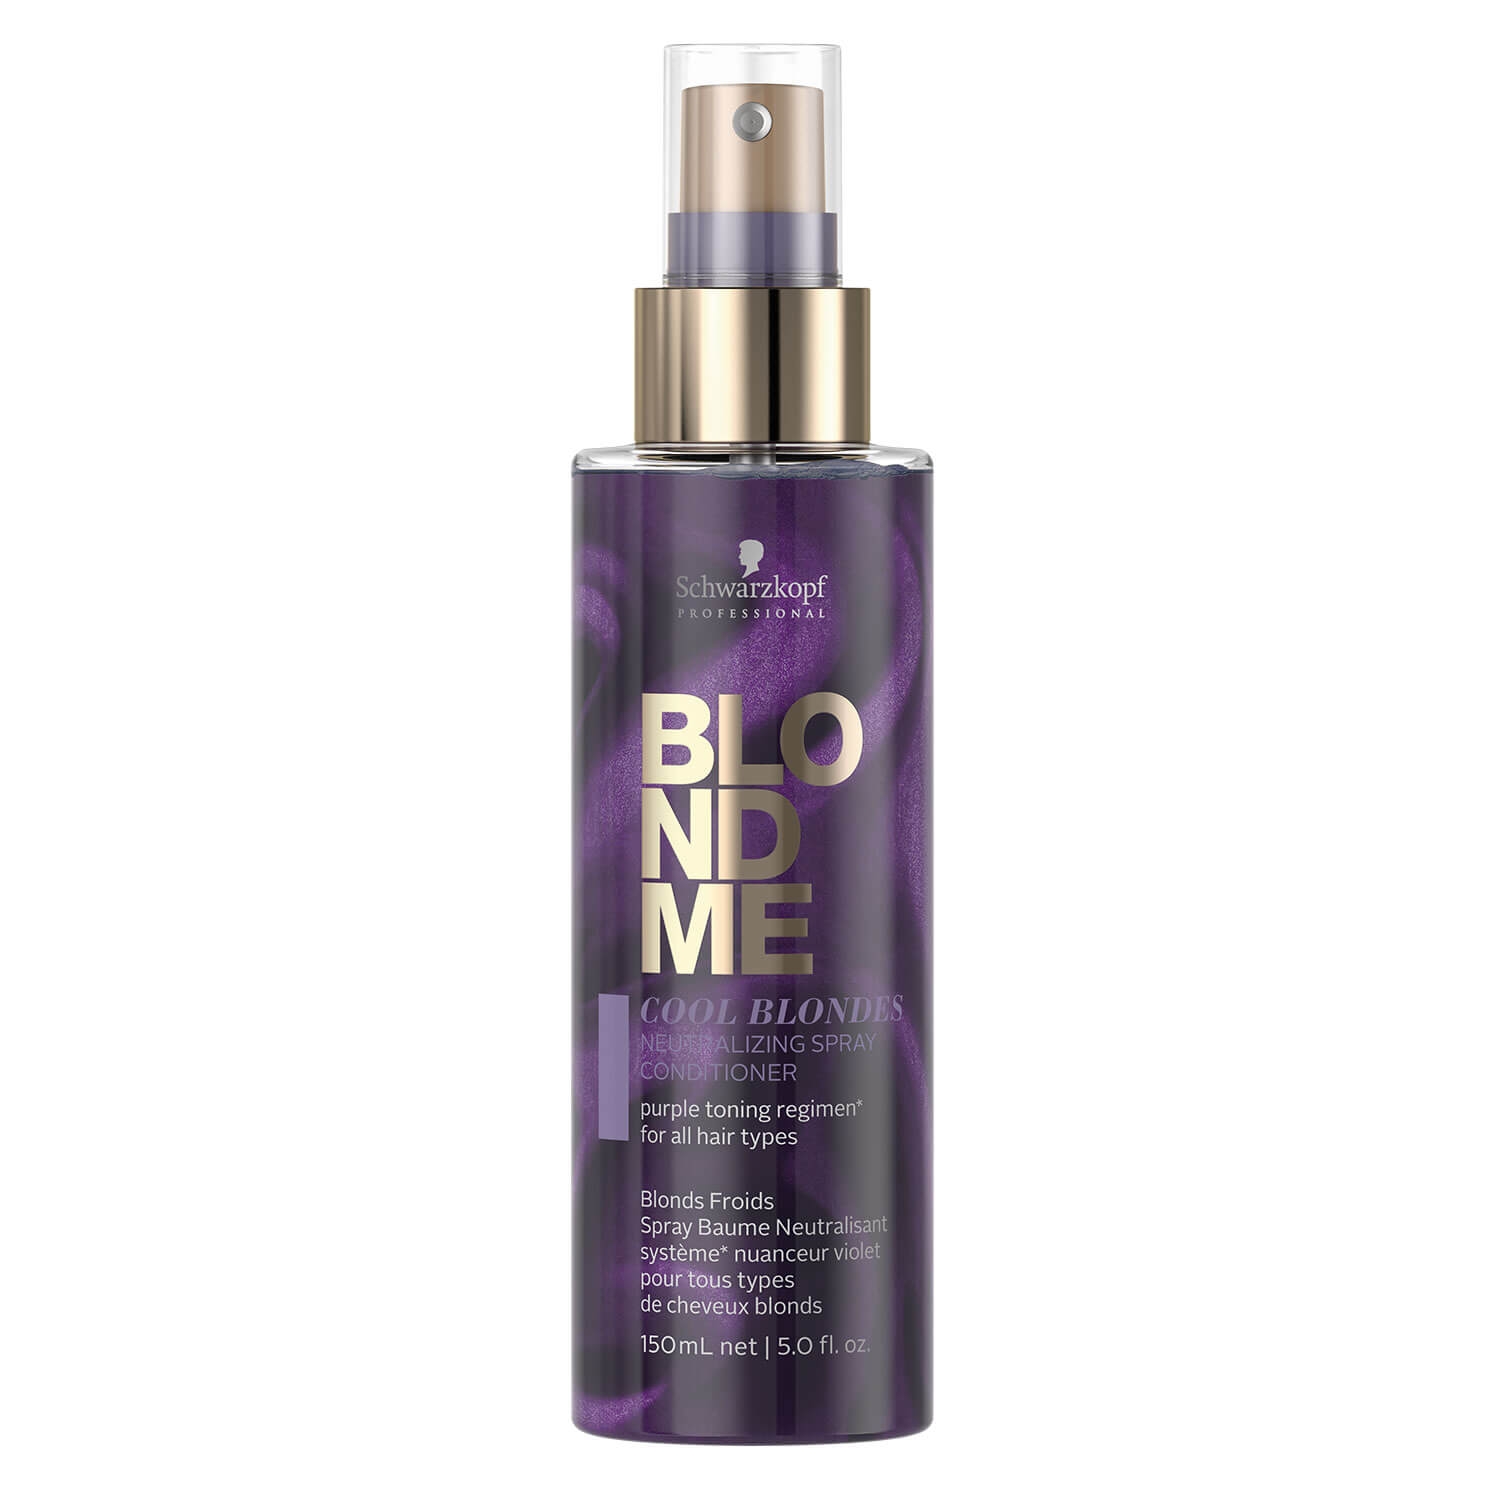 Product image from Blondme - Cool Blondes Neutralizing Spray Conditioner